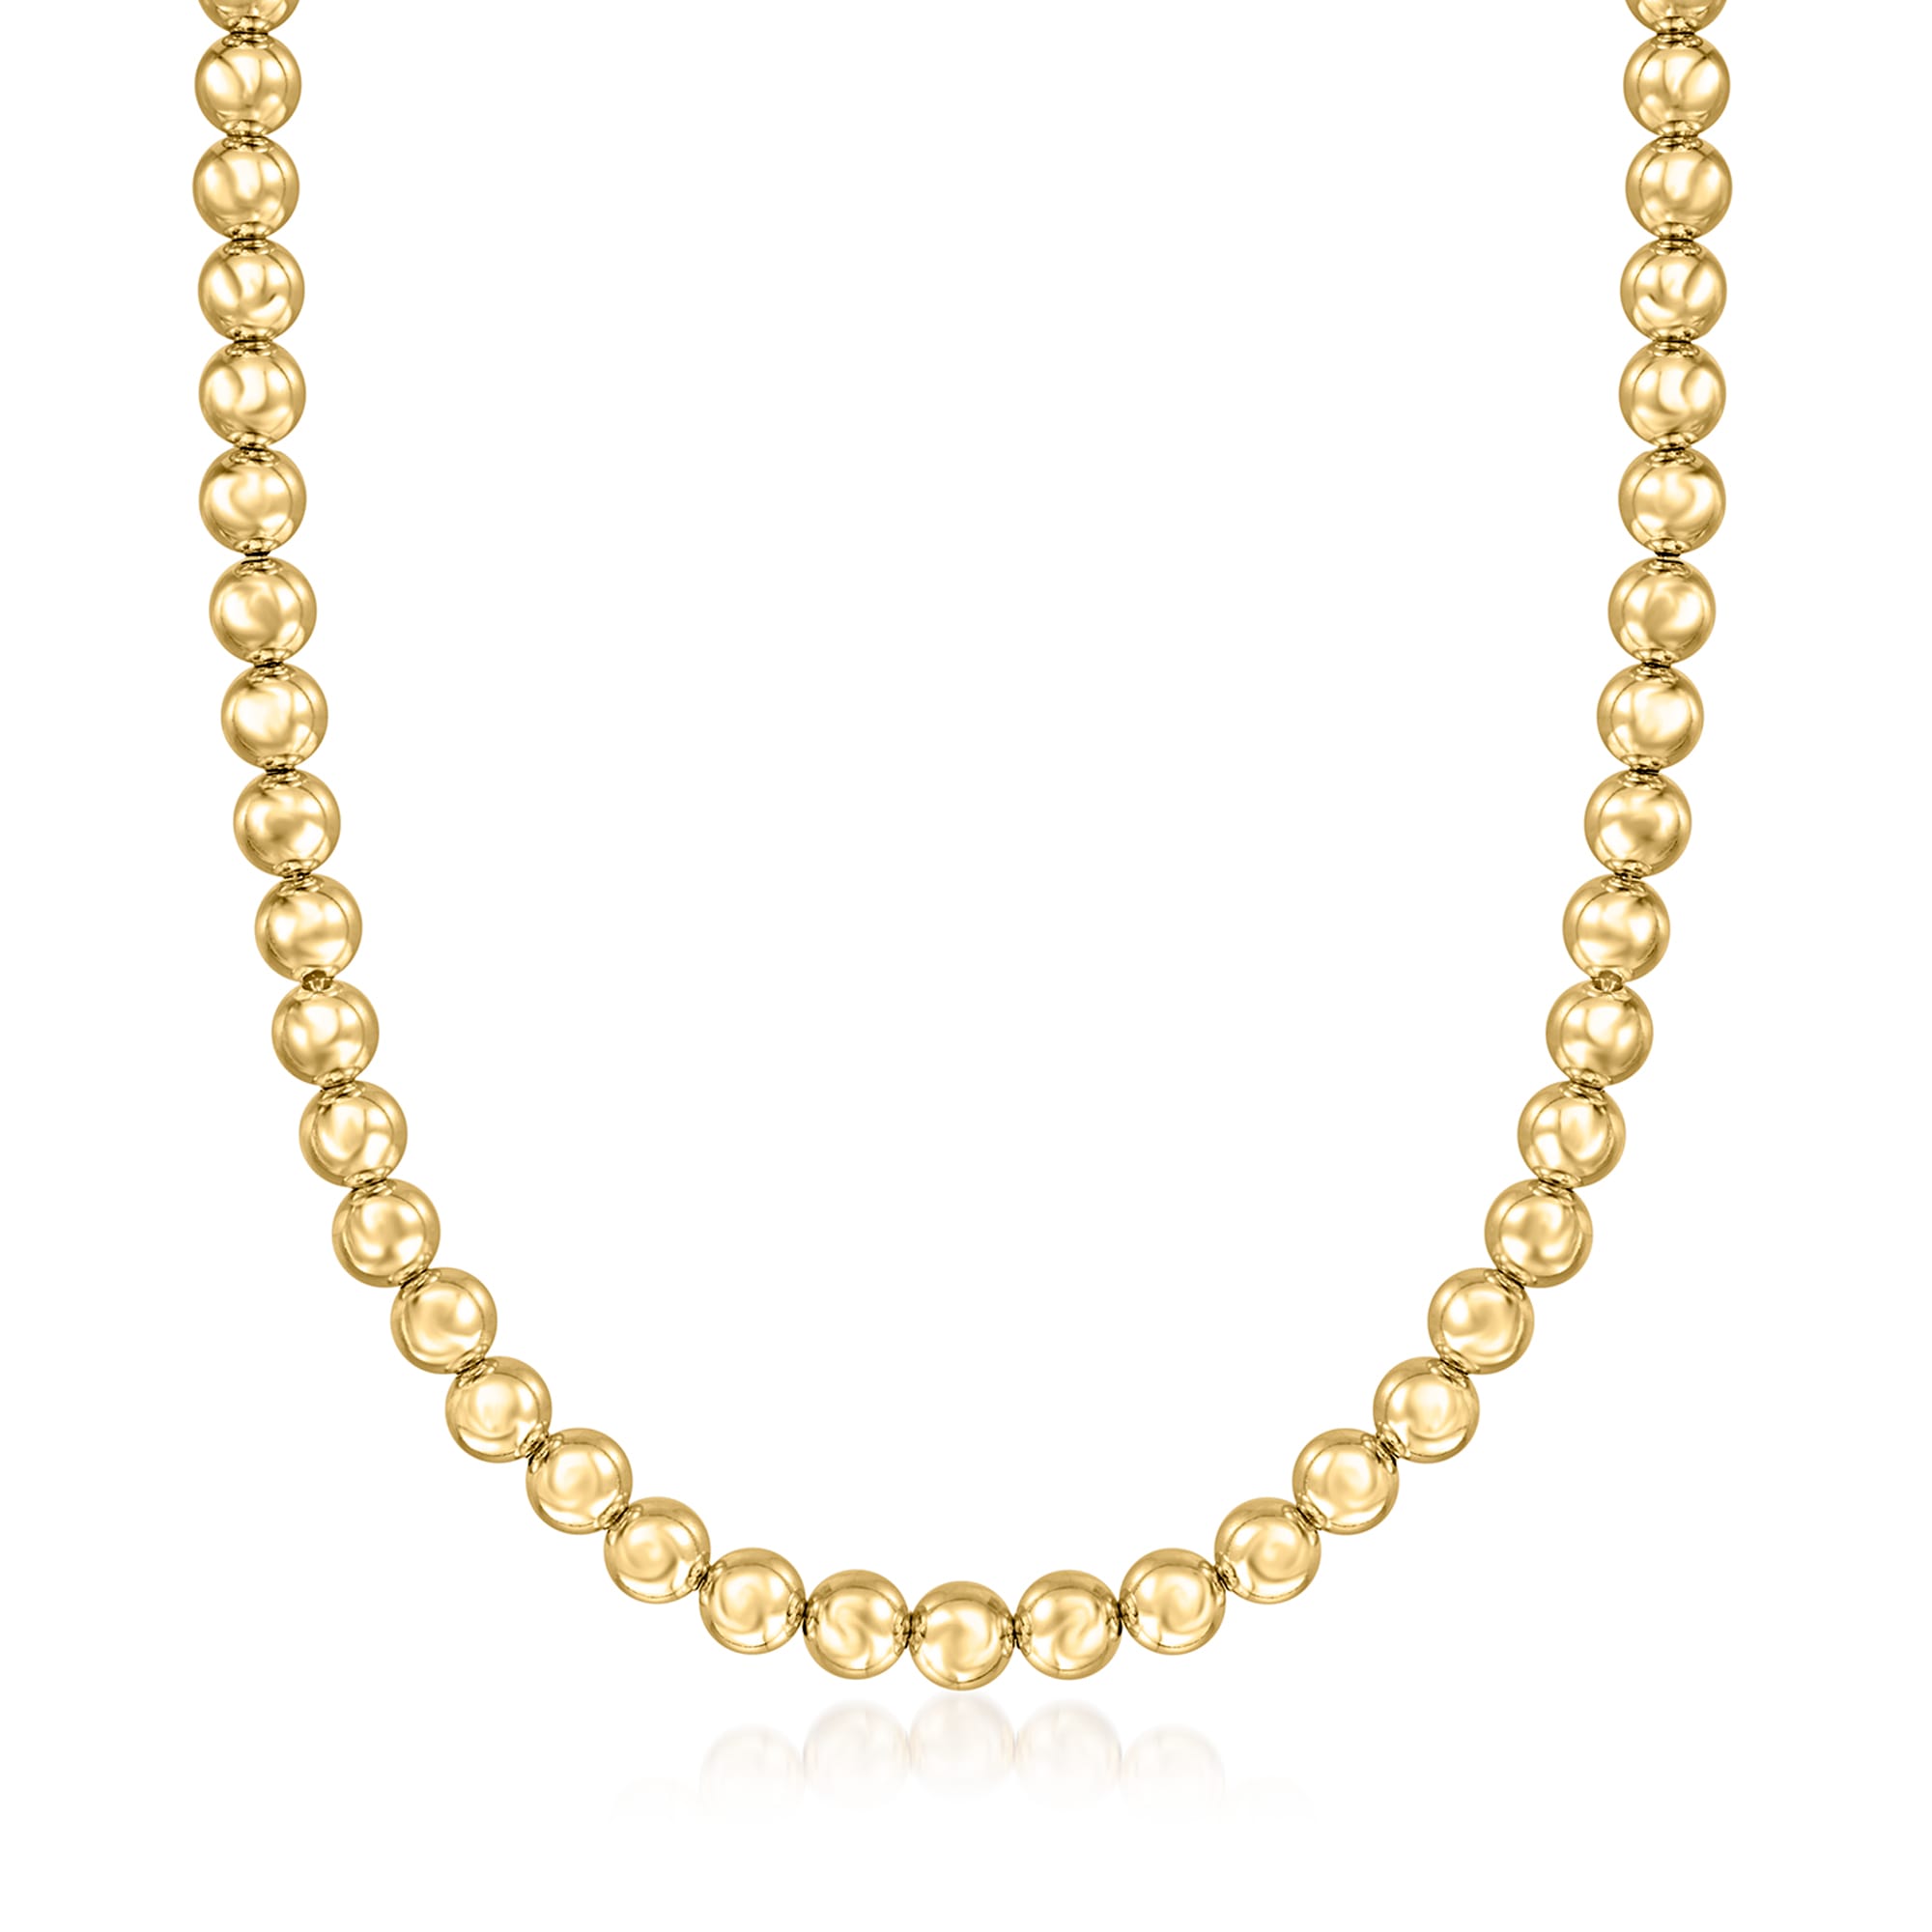 Italian 7mm 14kt Yellow Gold Bead Necklace. 18